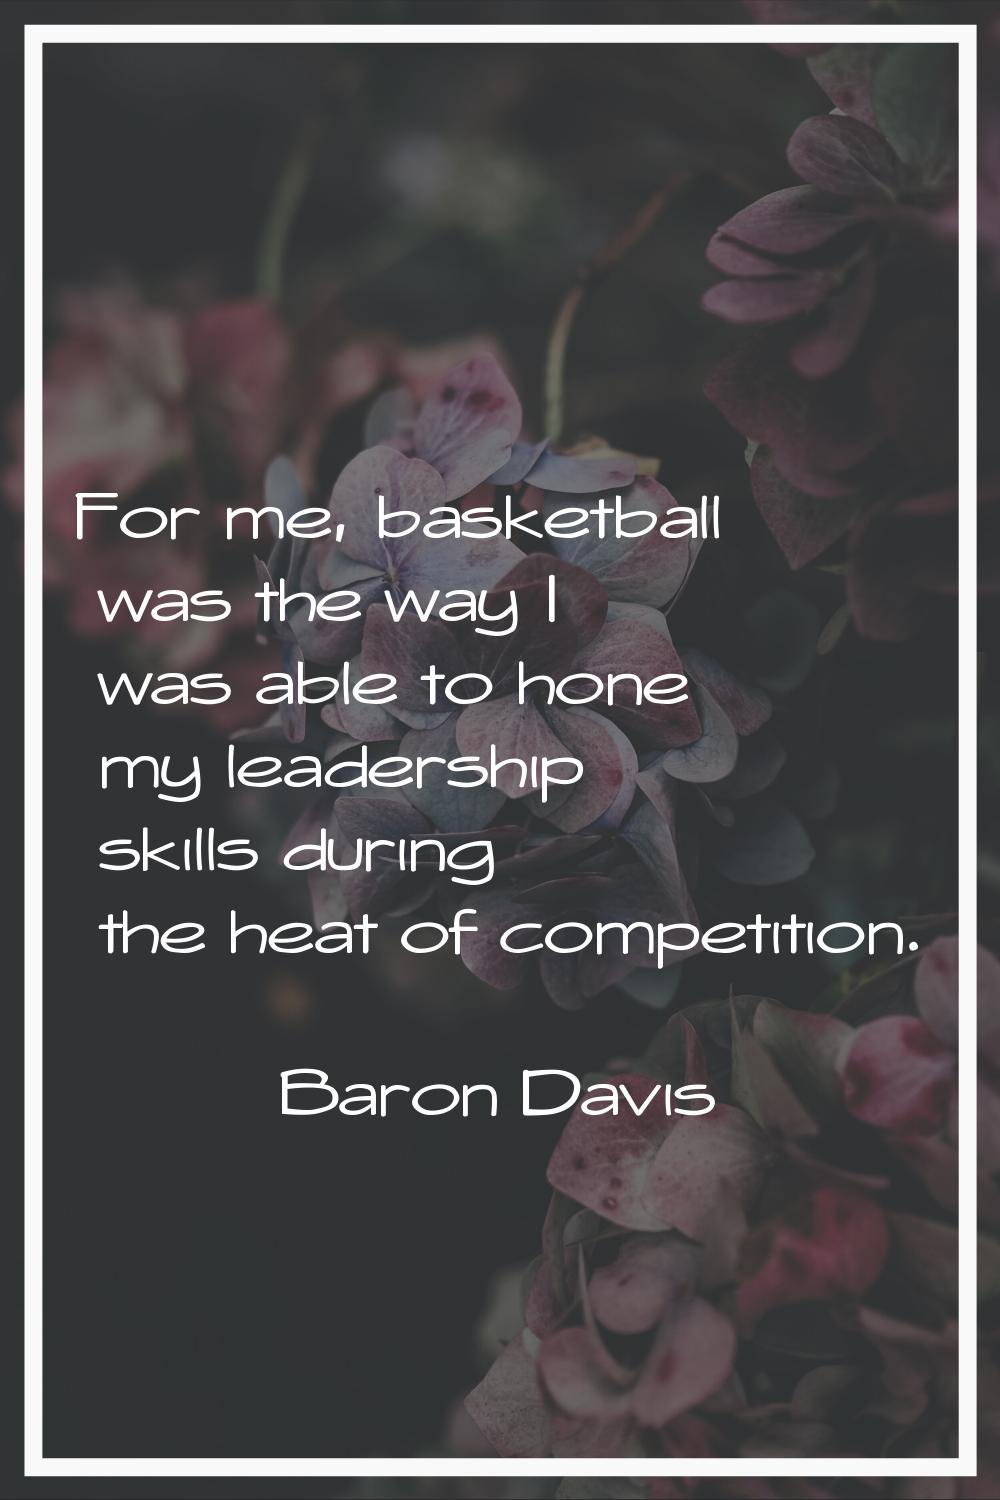 For me, basketball was the way I was able to hone my leadership skills during the heat of competiti